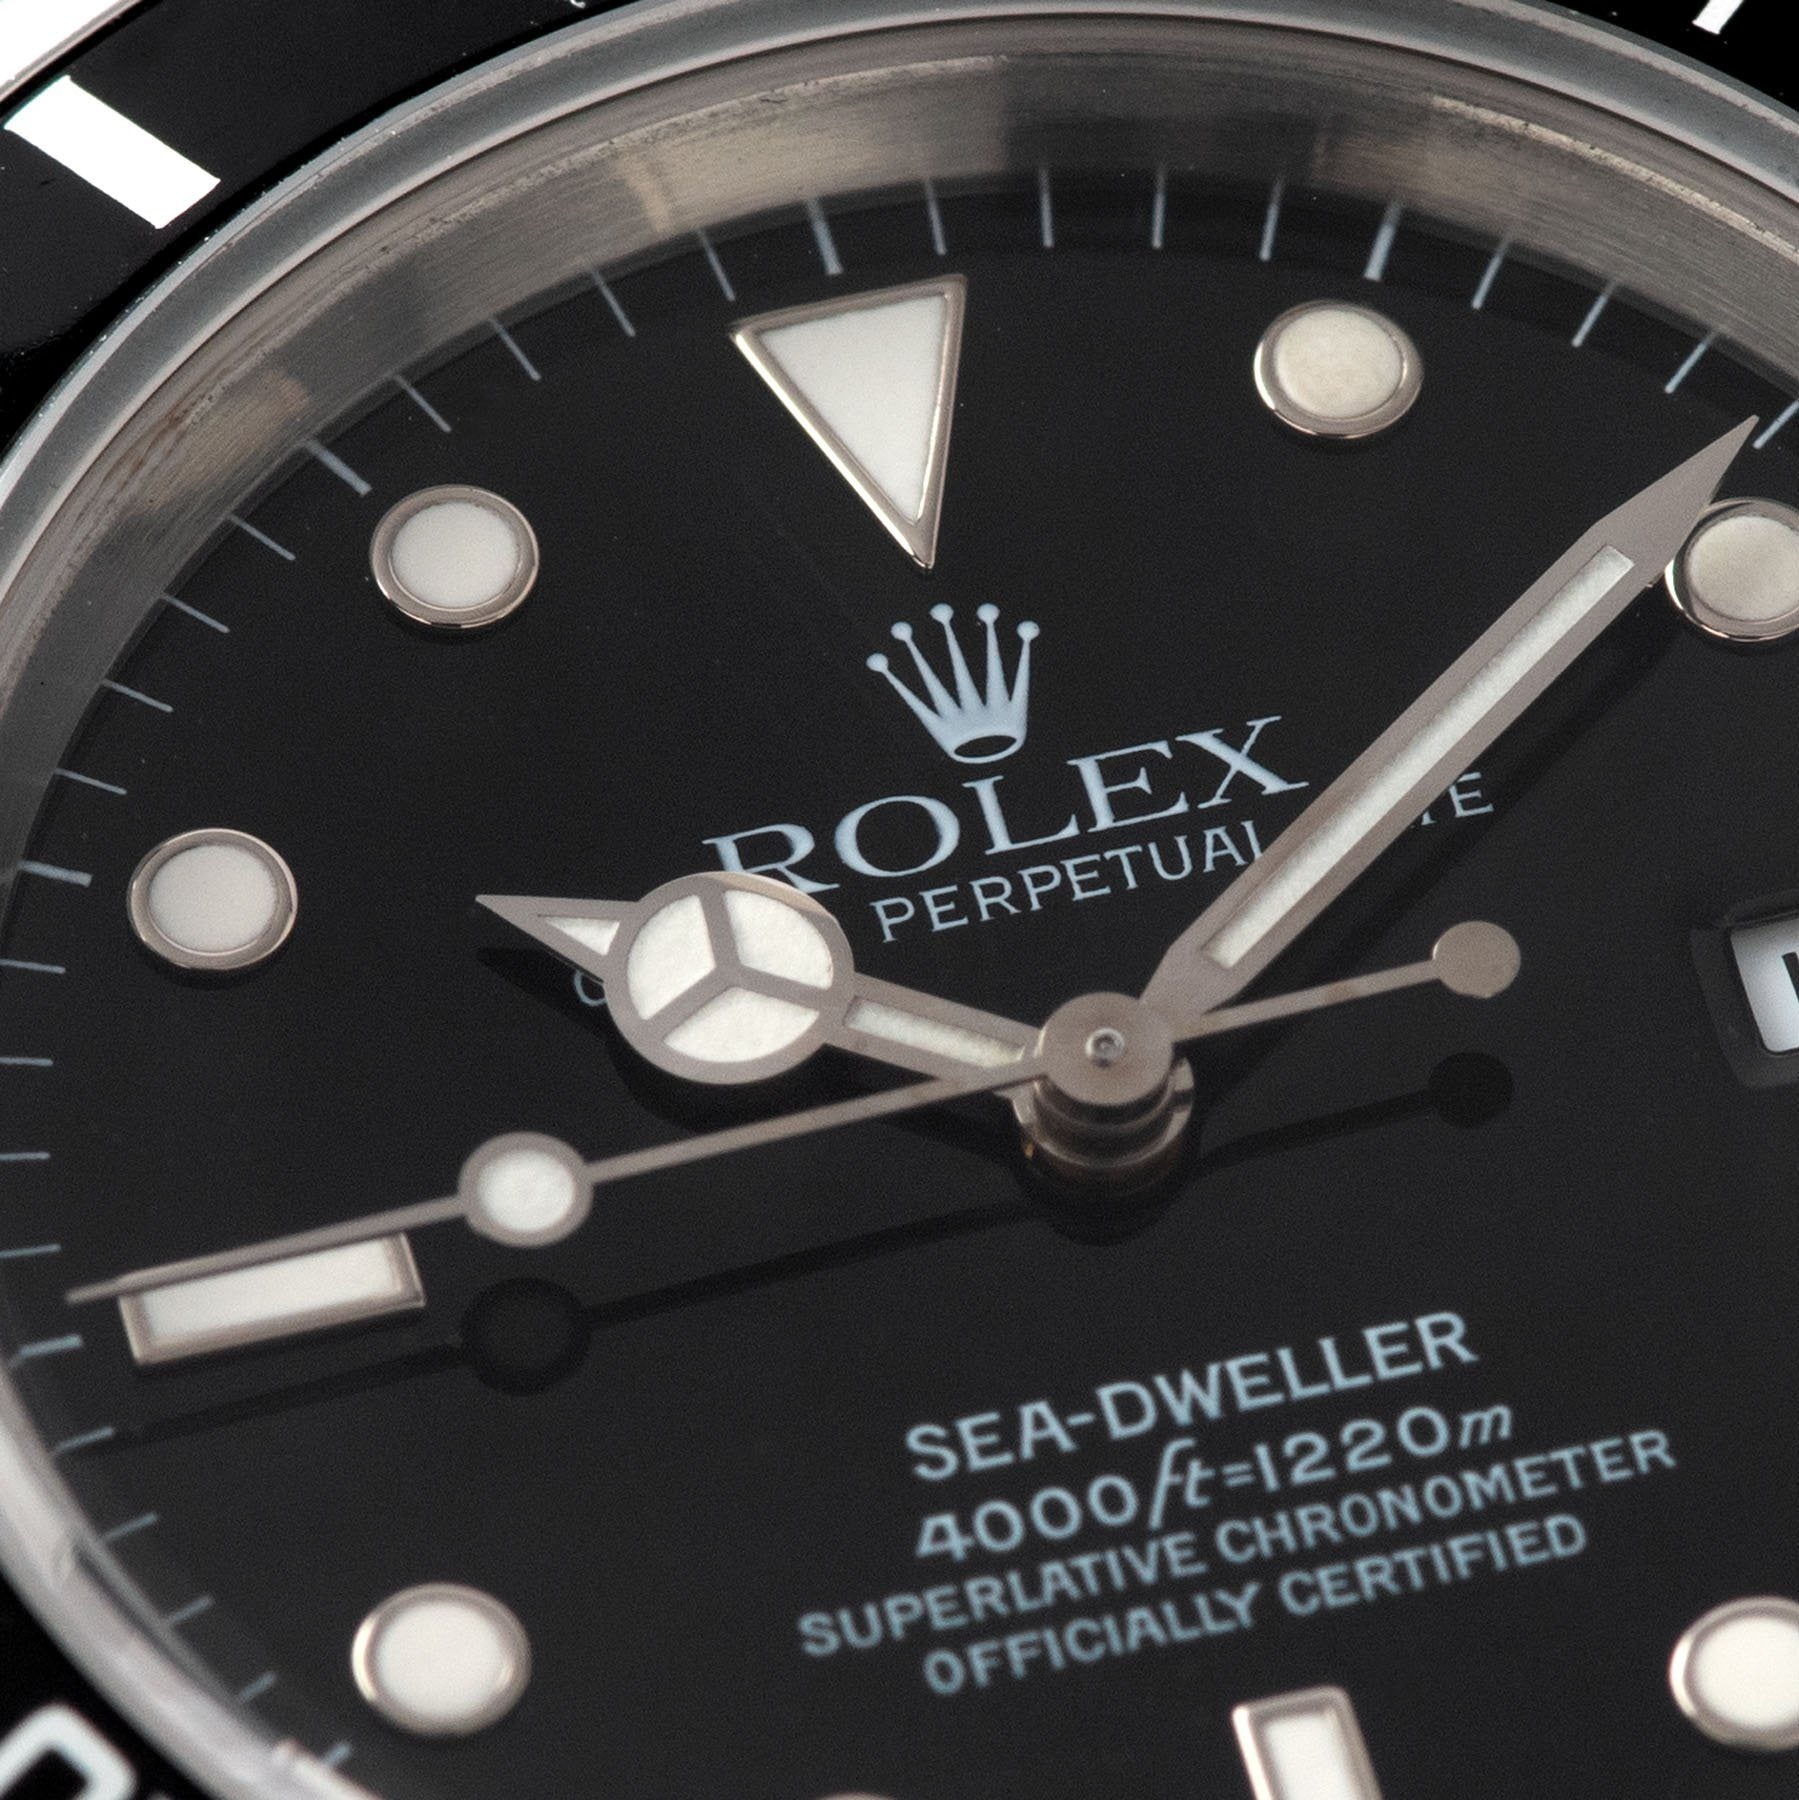 Rolex Seadweller Reference 16600 box and paper set 1995 tritium dial